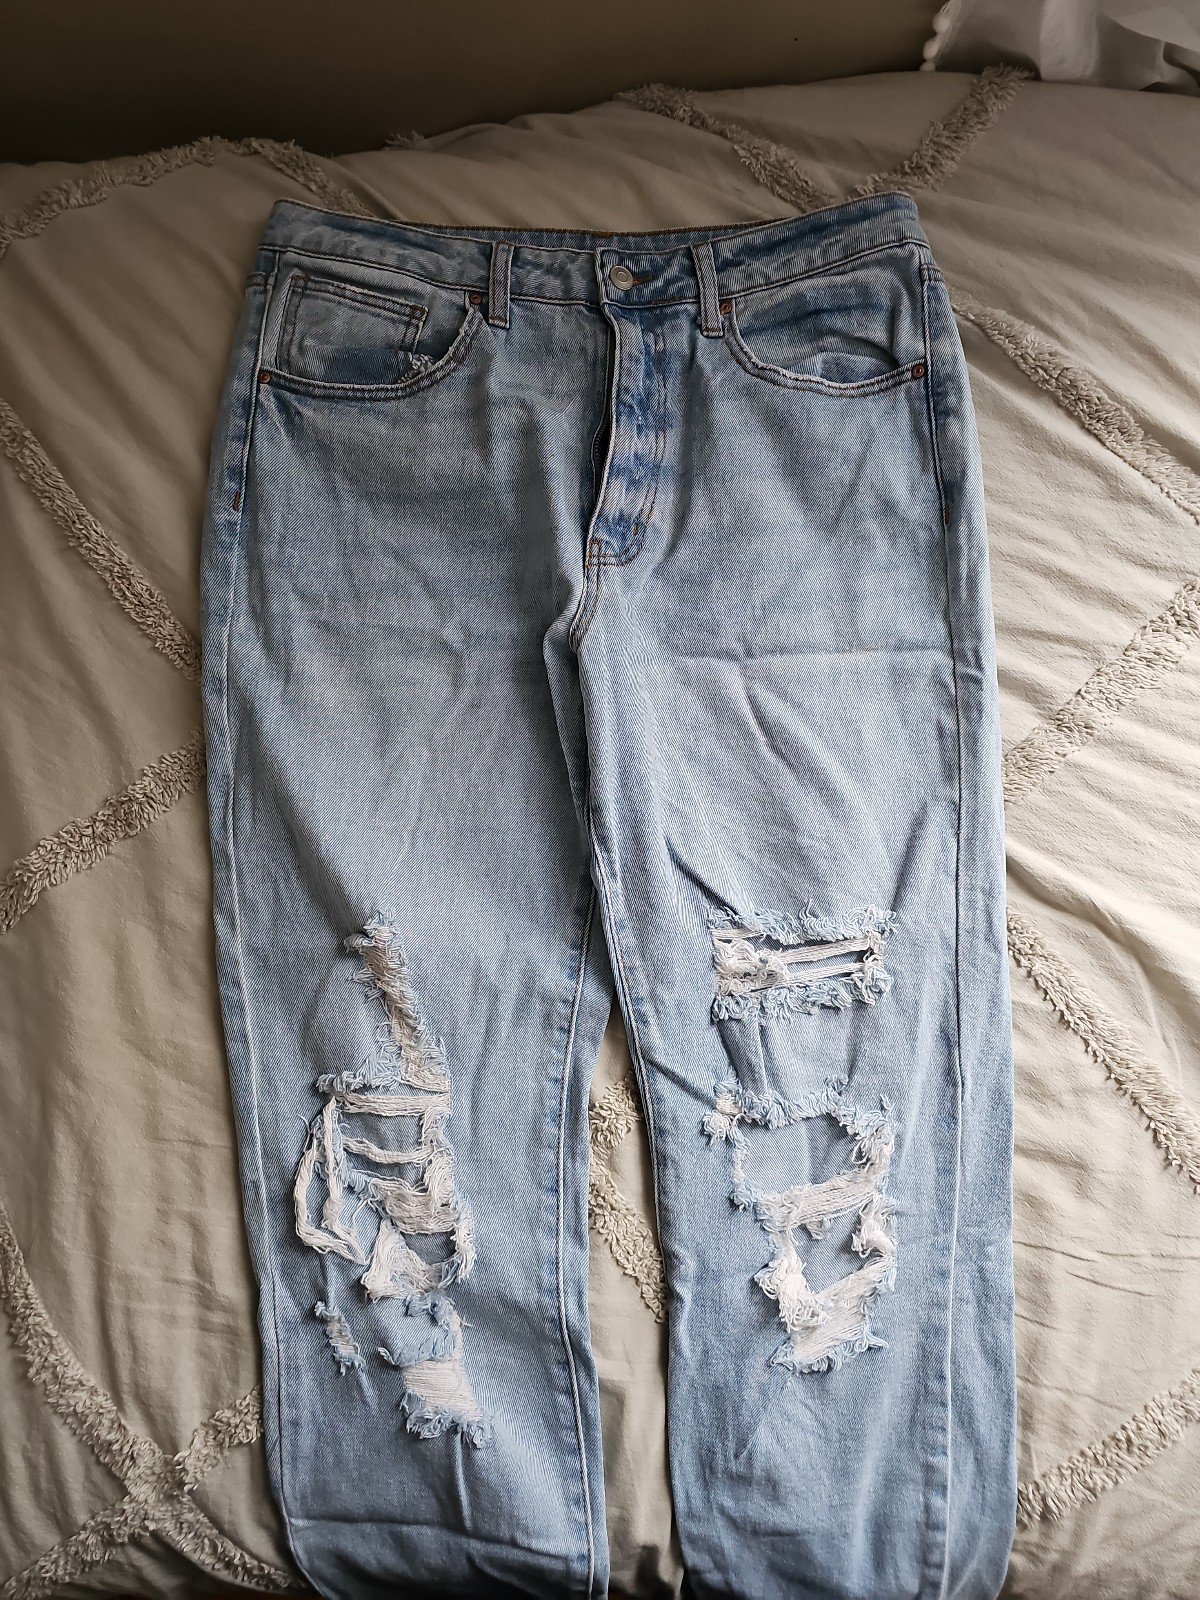 large selection No boundaries Distressed Jean´s size 13 O8utaxICs Great